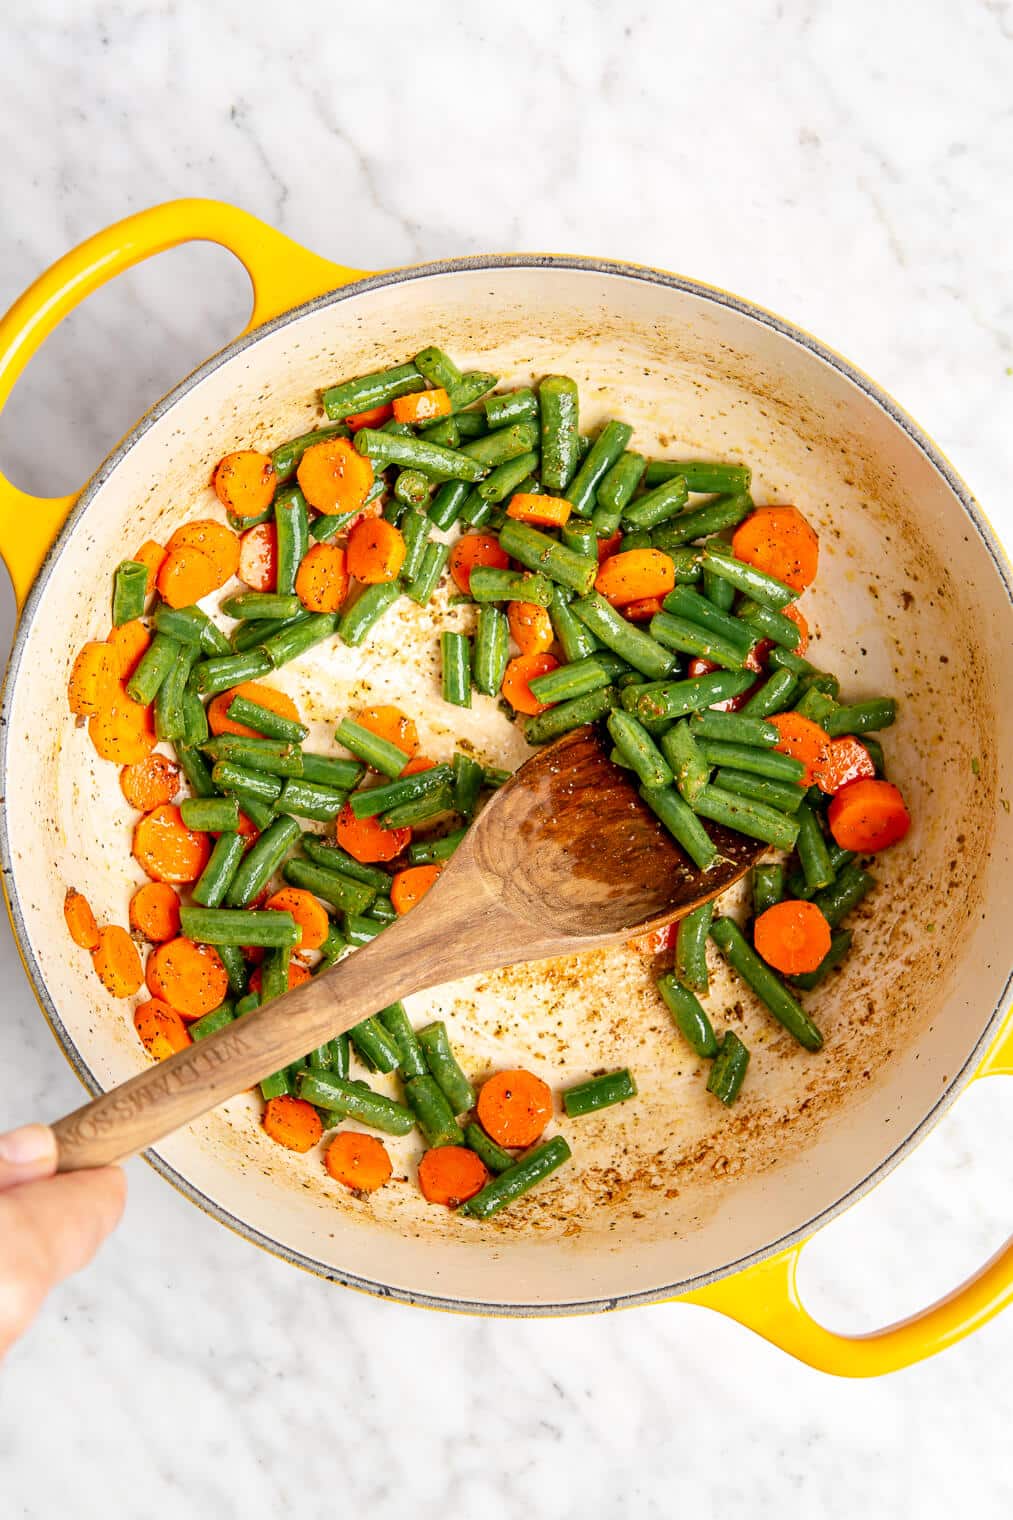 Sautéed green beans and carrots in an enameled dutch oven.